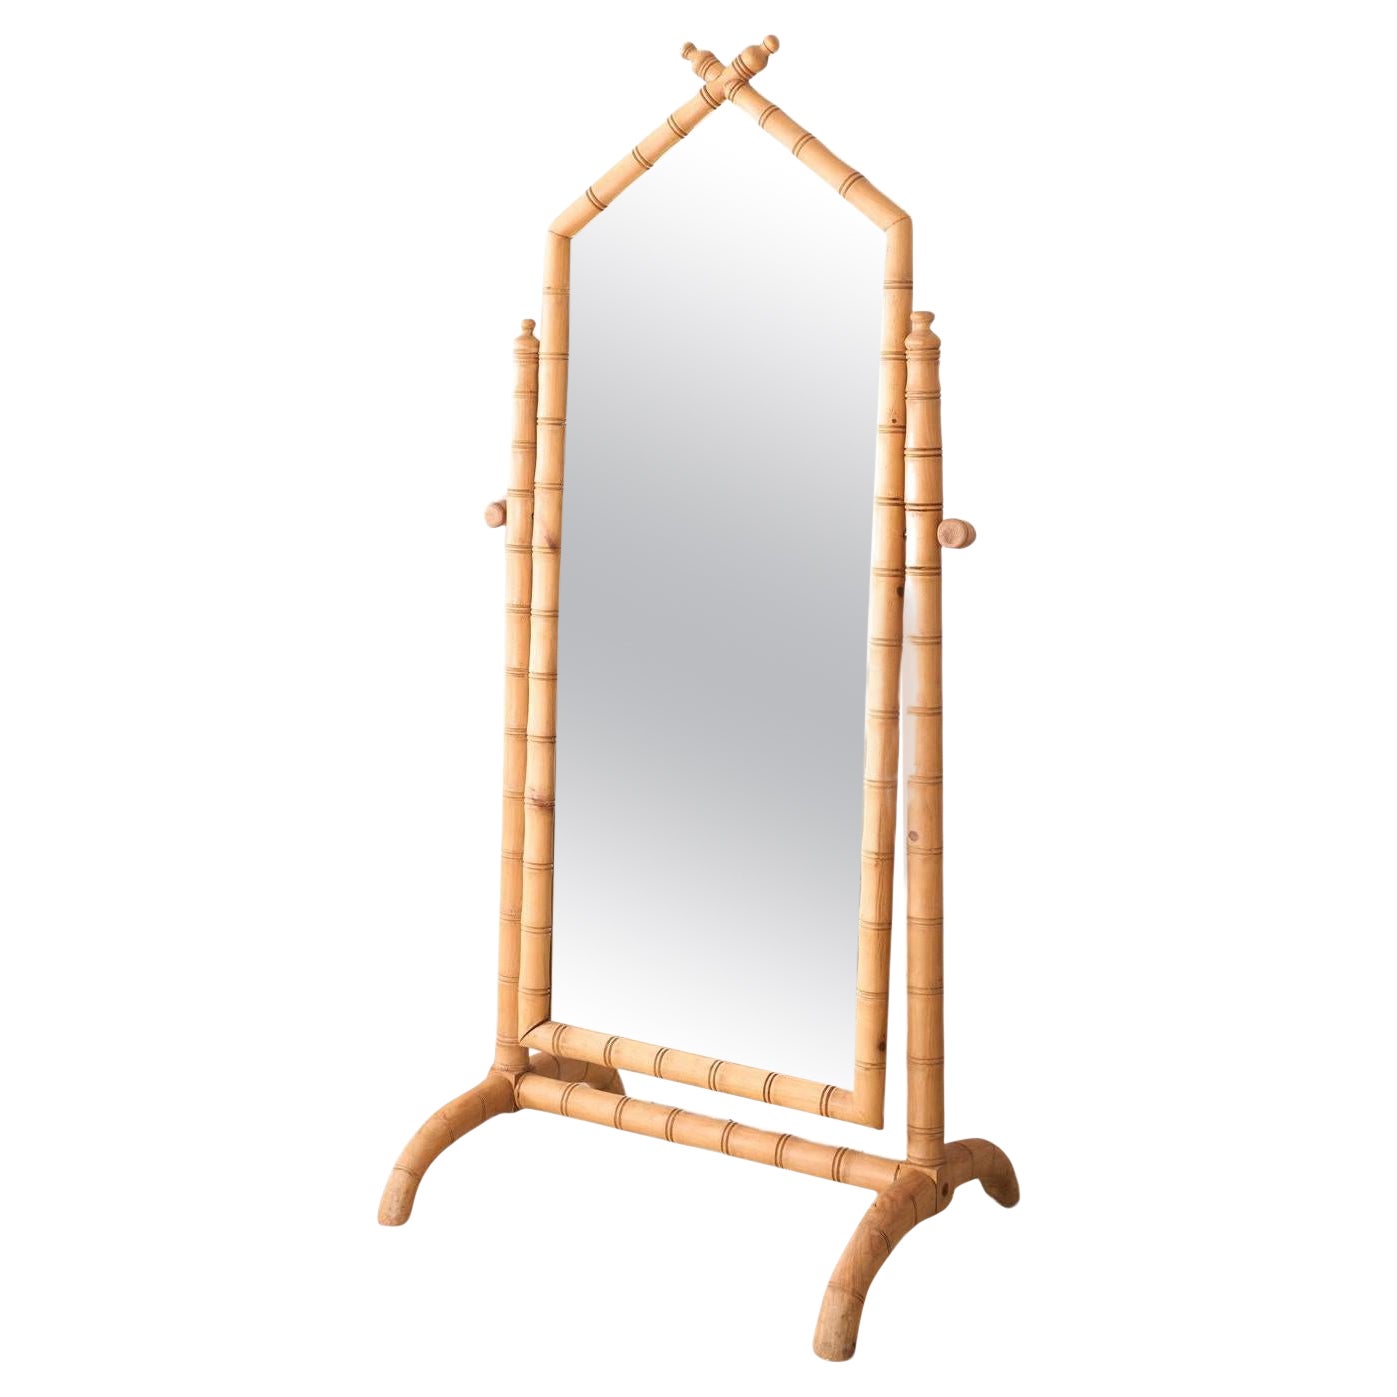 Early 20th century Faux bamboo cheval mirror For Sale